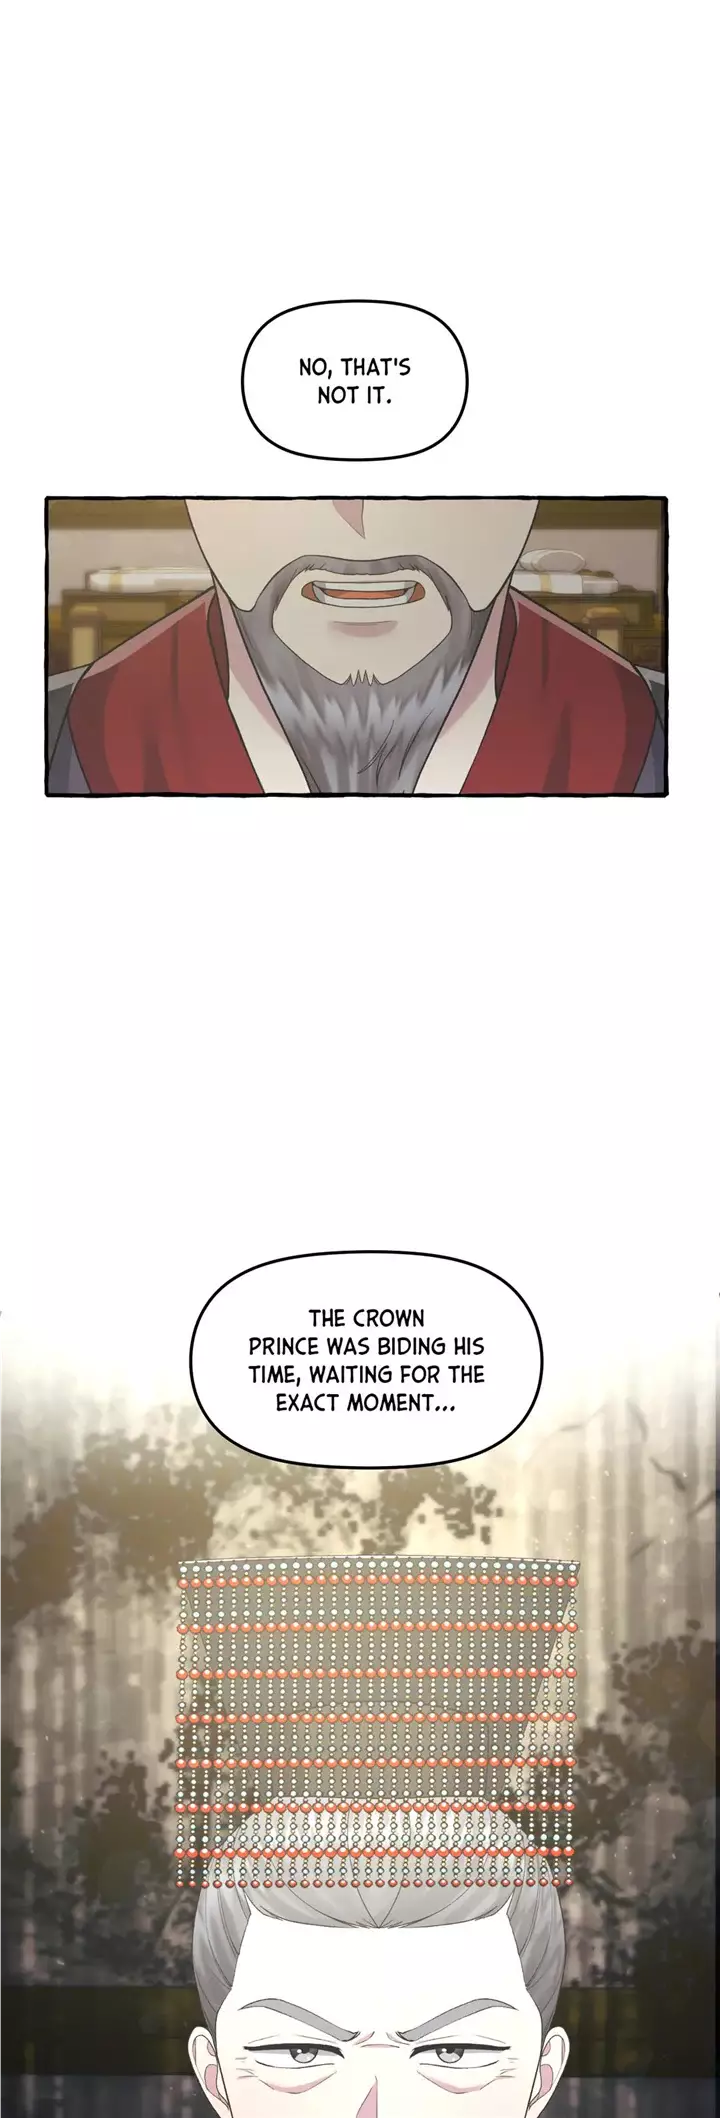 Cheer Up, Your Highness! - 48 page 51-690fddcf